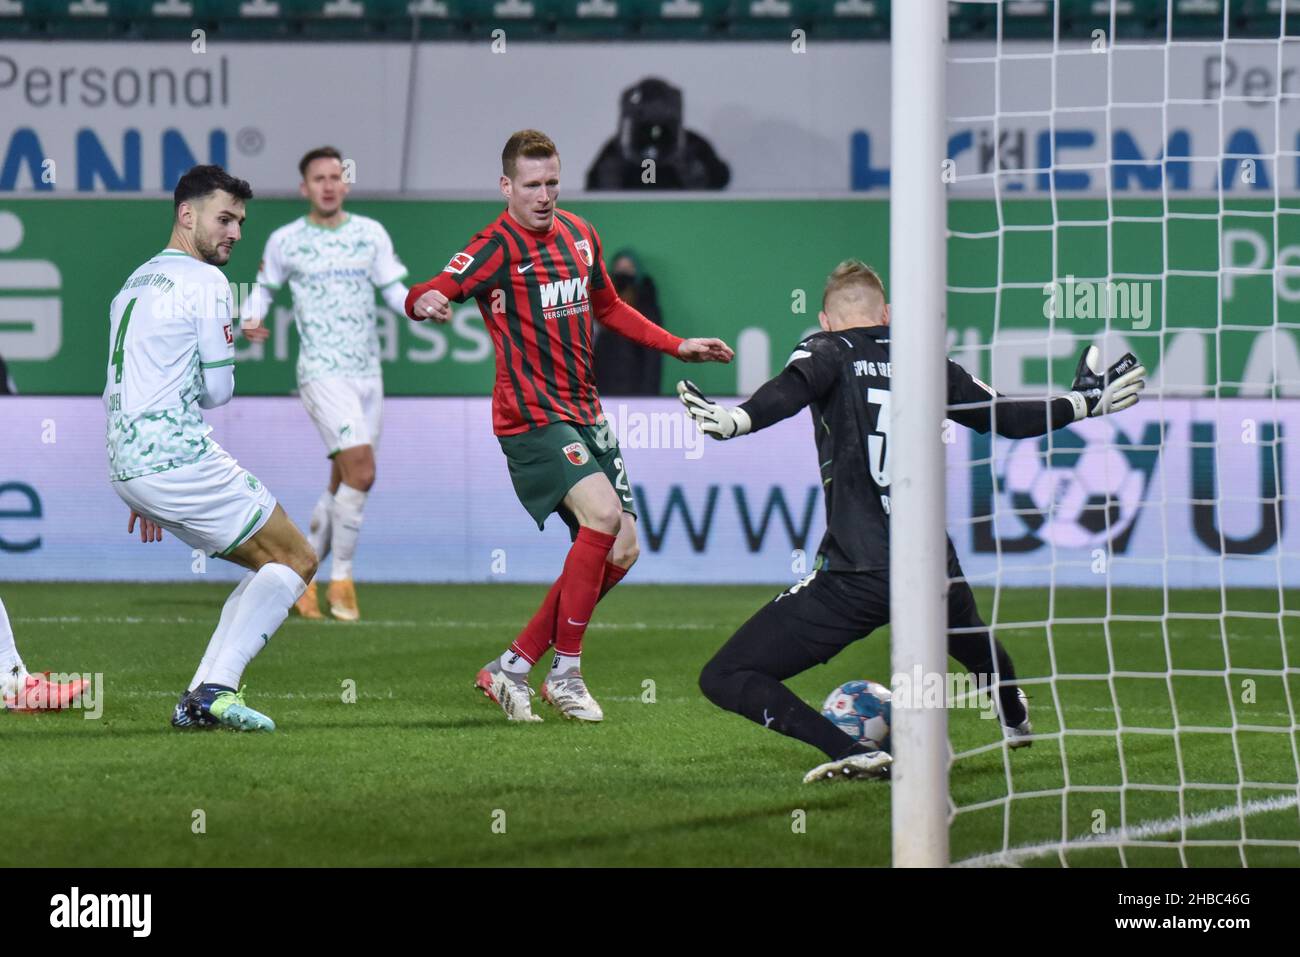 Germany ,Fuerth, Sportpark Ronhof Thomas Sommer - 18 Dec 2021 - Fussball, 1.Bundesliga - SpVgg Greuther Fuerth vs. FC Augsburg  Image: (fLTR) Maximilian Bauer (SpVgg Greuther Fürth,4), Andre Hahn (FC Augsburg, 28); GK Sascha Burchert (SpVgg Greuther Fürth,30) blocking a close-ranged shot.  DFL regulations prohibit any use of photographs as image sequences and or quasi-video Credit: Ryan Evans/Alamy Live News Stock Photo